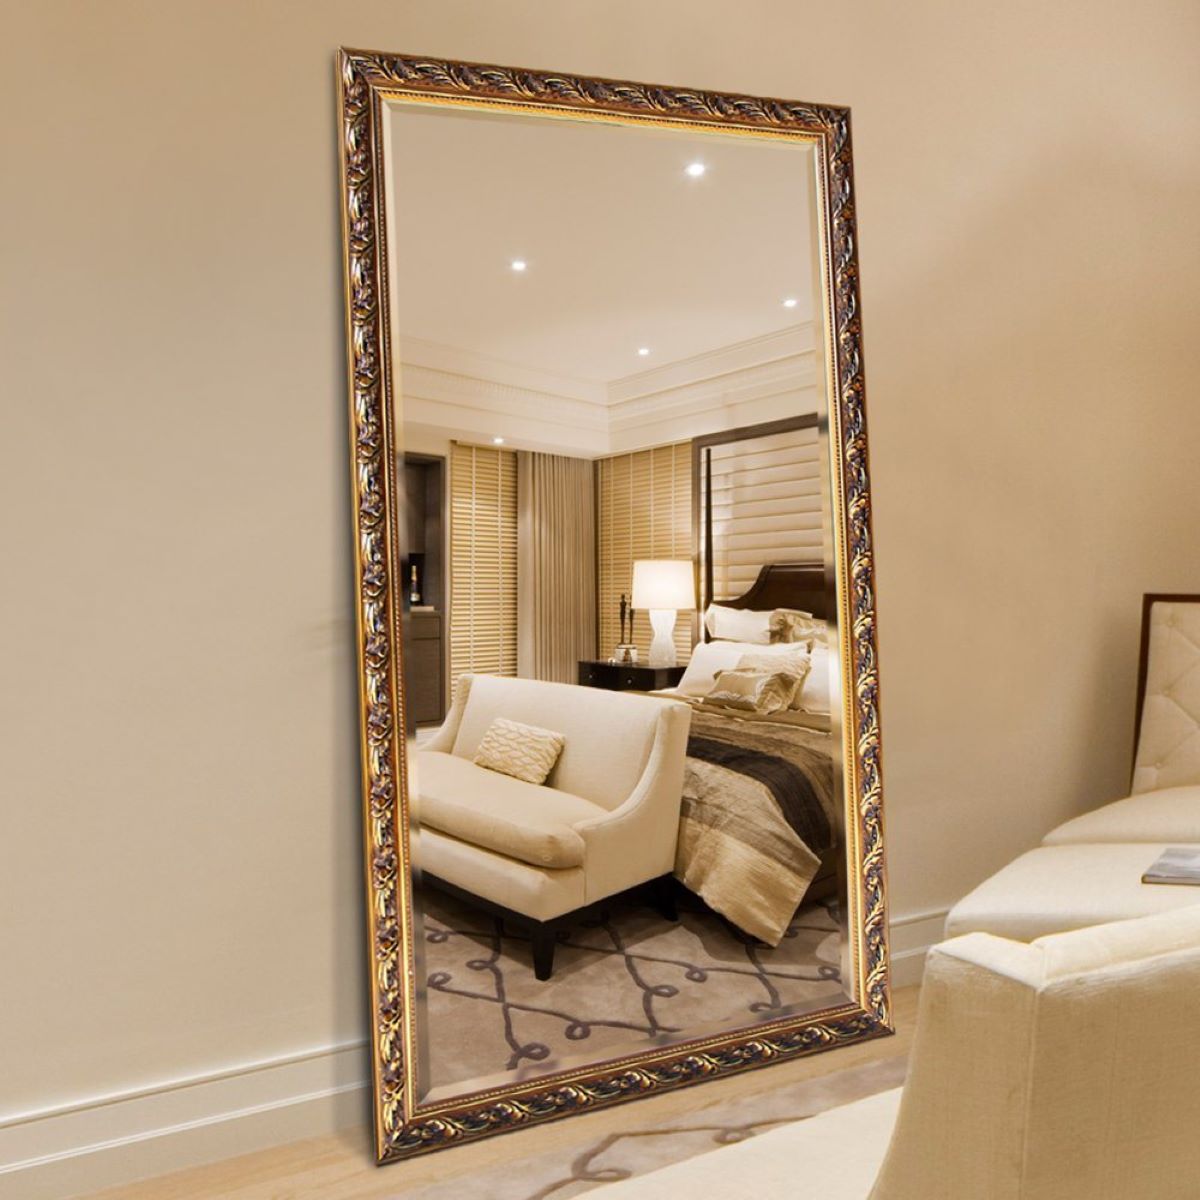 12 Unbelievable Wall Mirrors For Bedroom for 2023